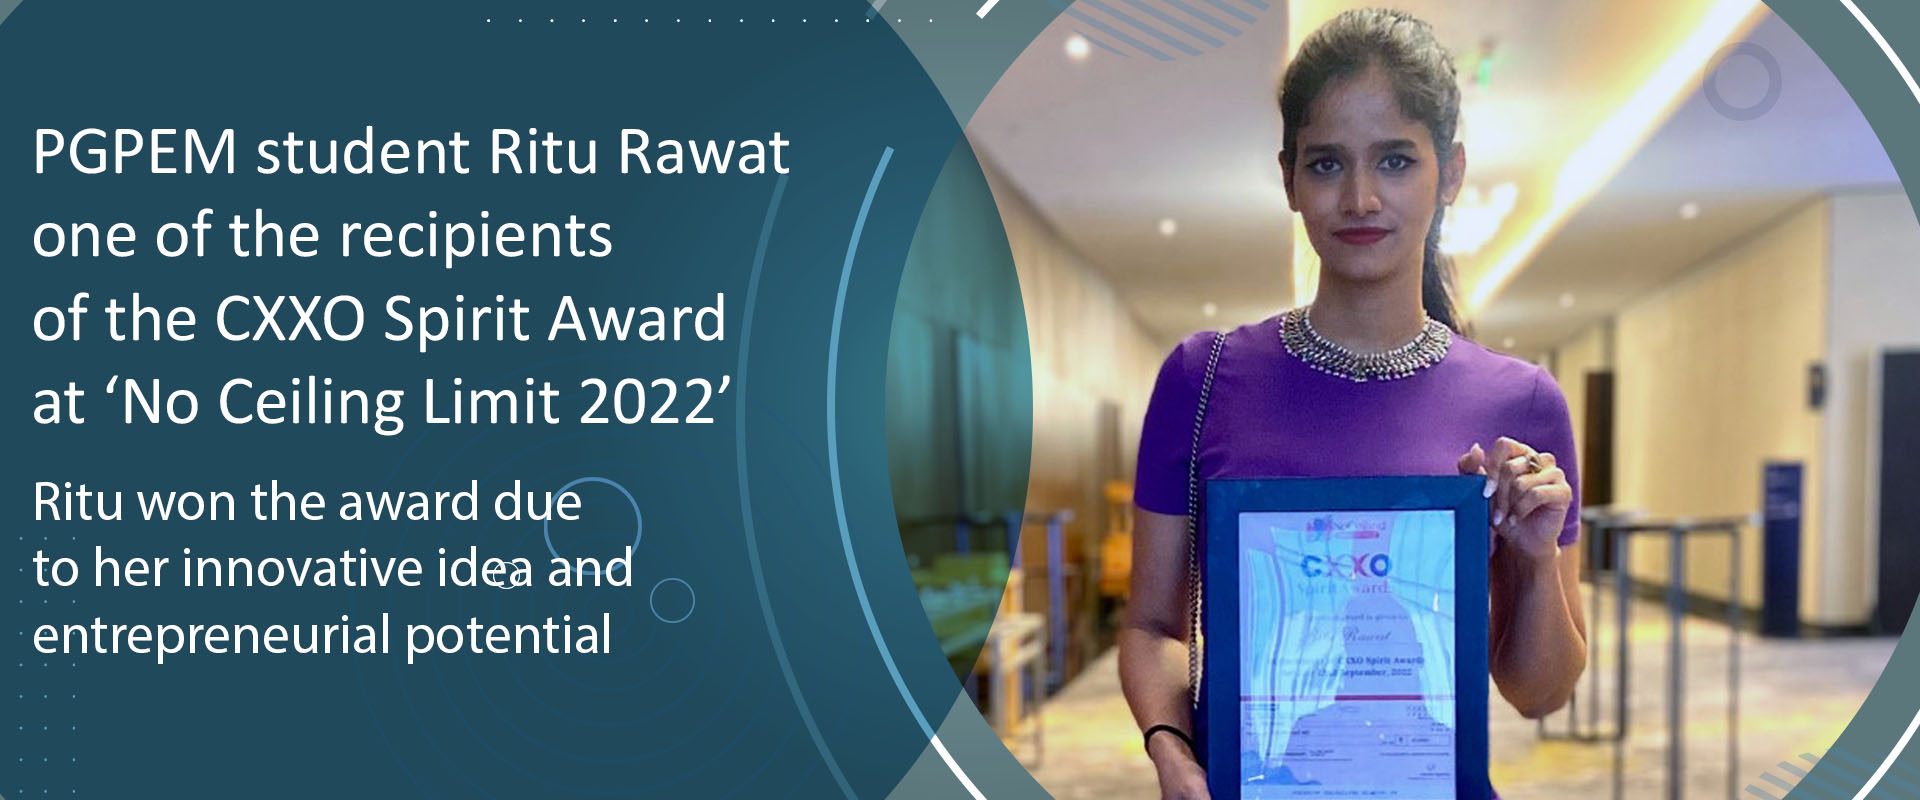 PGPEM student Ritu Rawat one of the recipients of the CXXO Spirit Award at ‘No Ceiling Limit 2022’